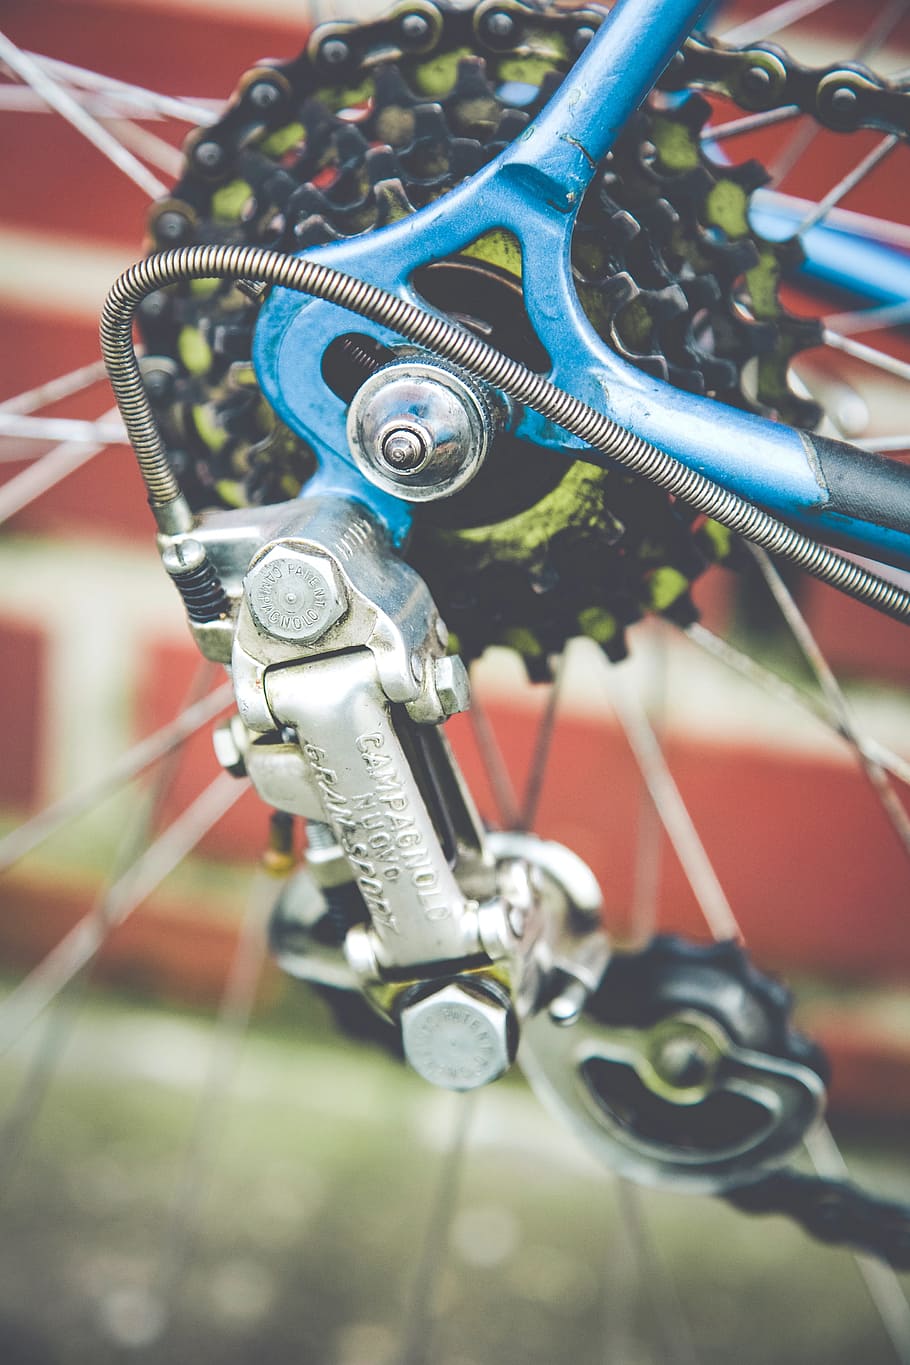 bicycle, bike, chain, metal, close-up, focus on foreground, day, selective focus, outdoors, technology